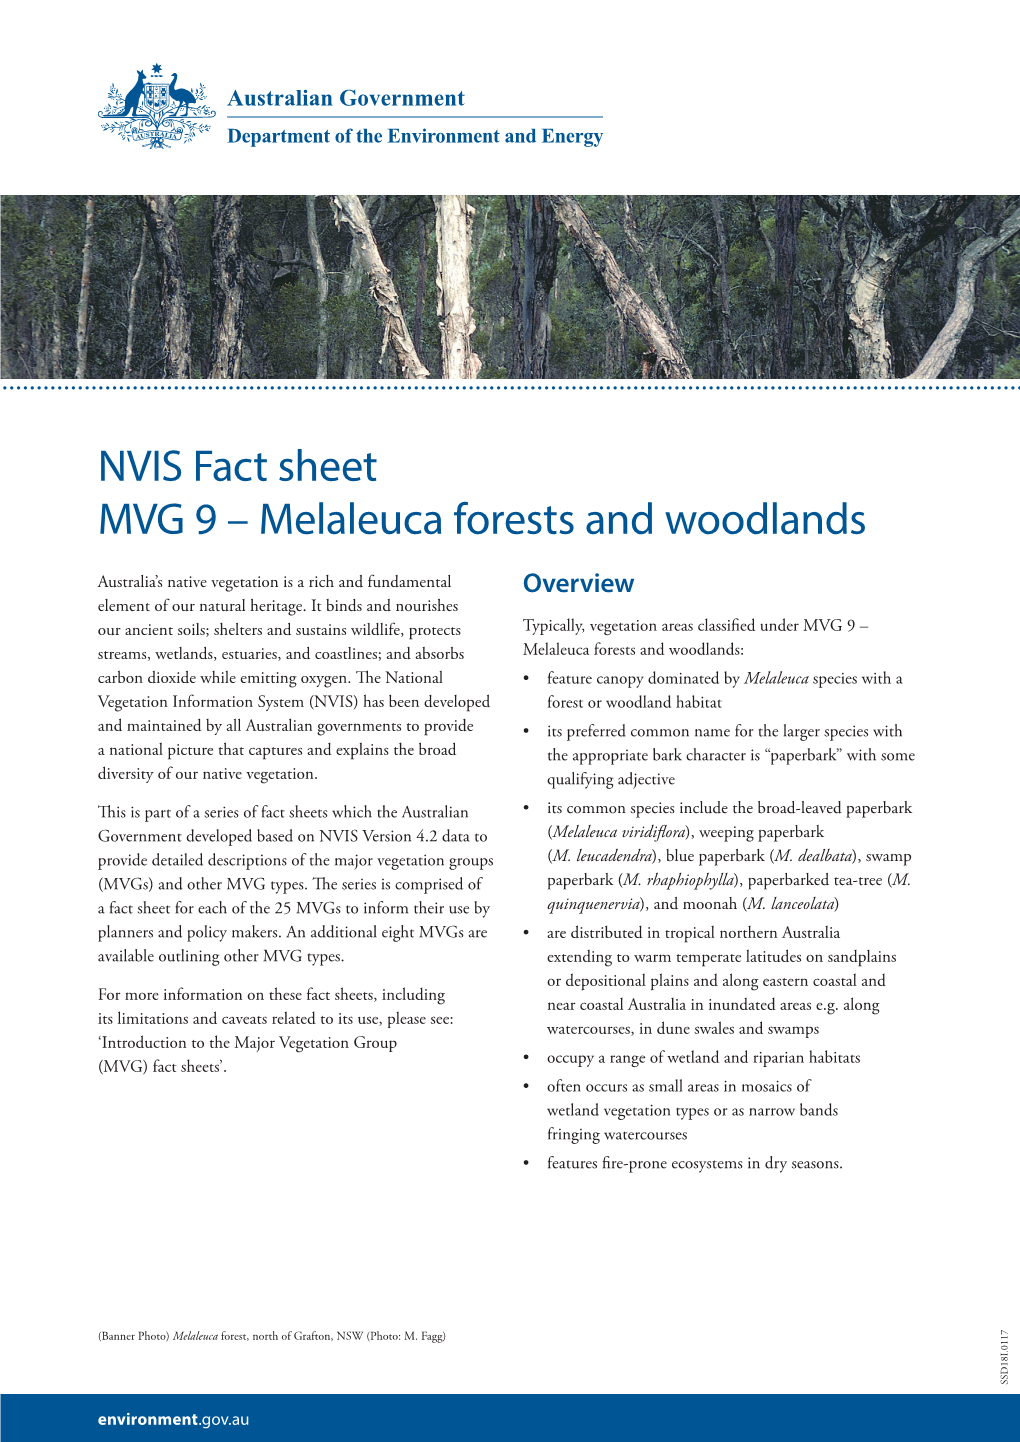 NVIS Fact Sheet MVG 9 – Melaleuca Forests and Woodlands